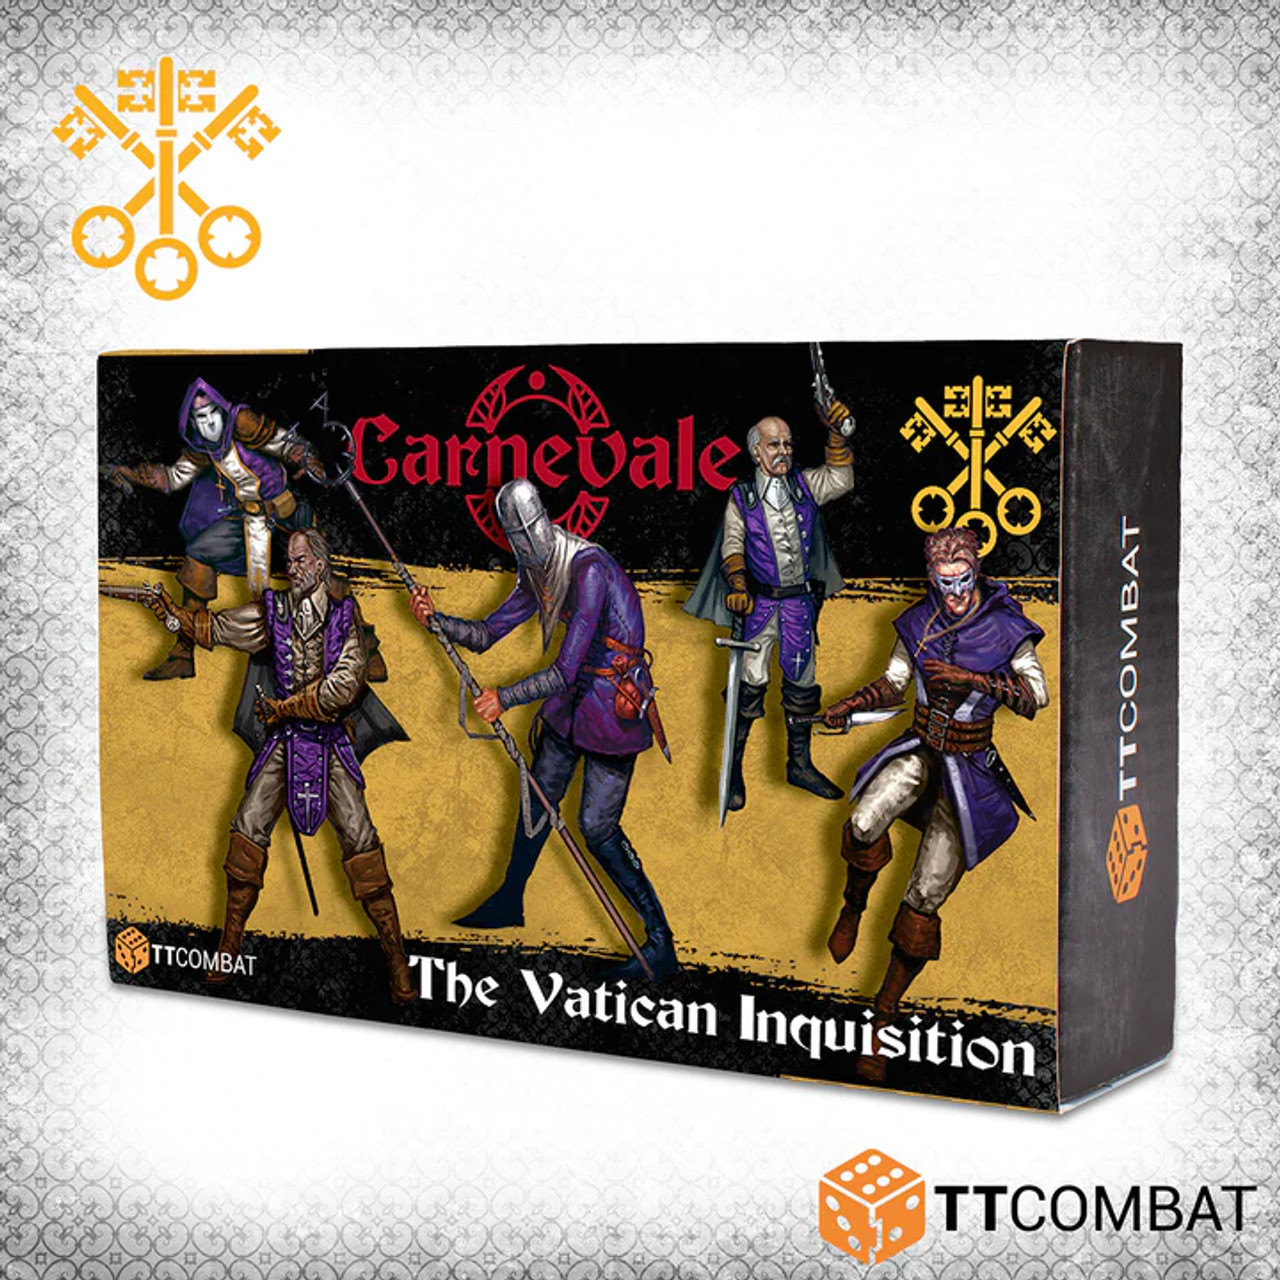 The Vatican: Inquisition